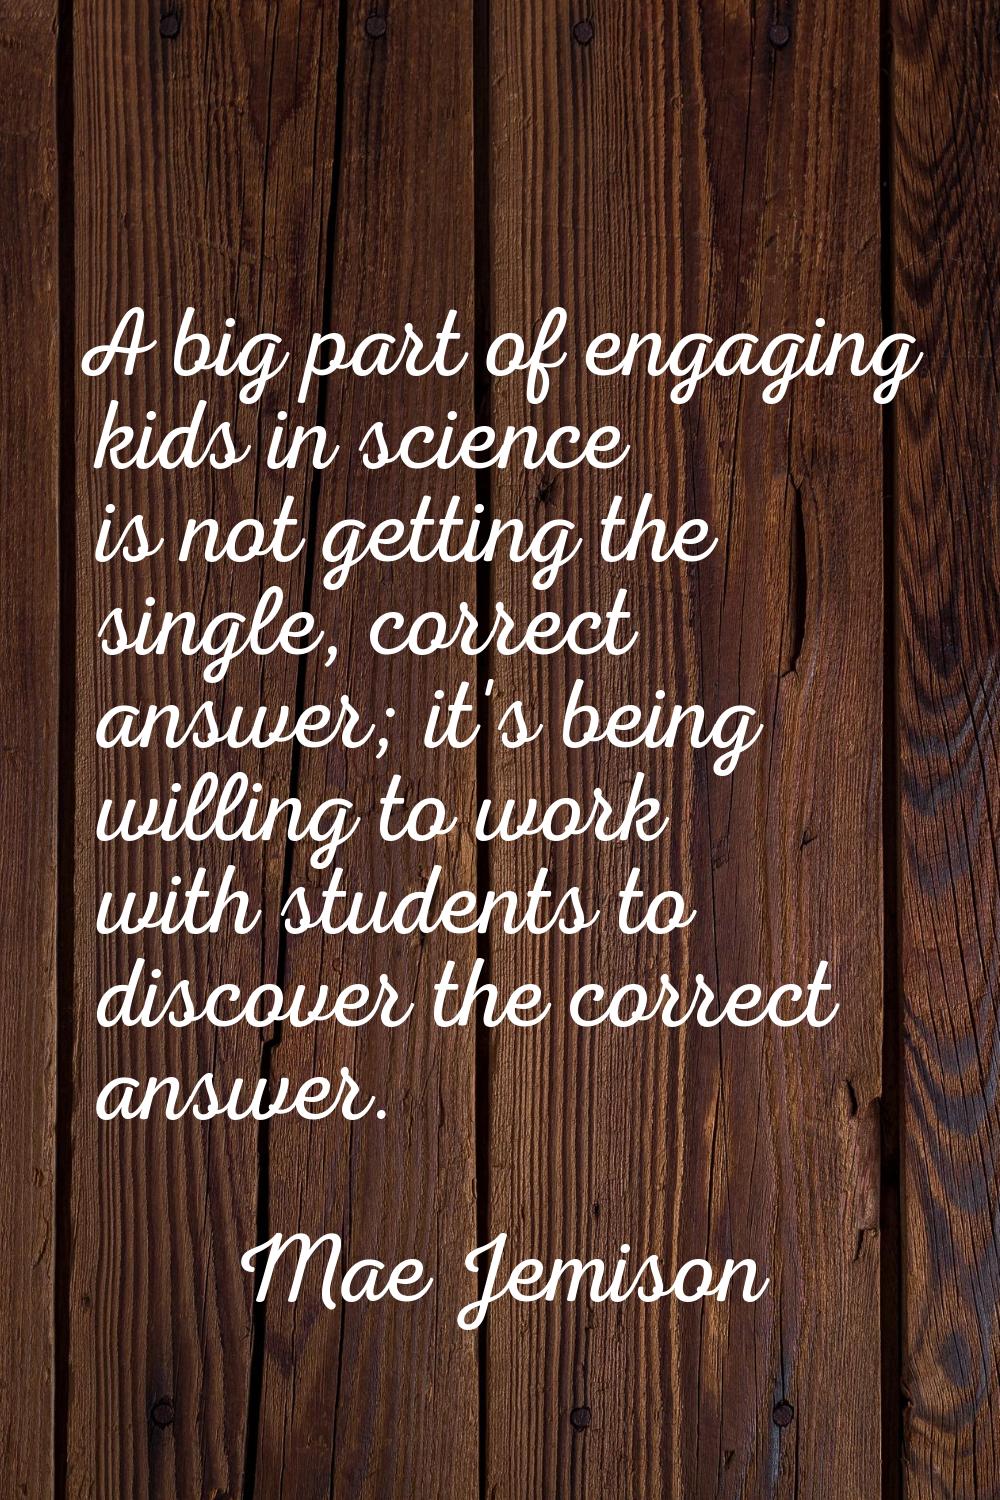 A big part of engaging kids in science is not getting the single, correct answer; it's being willin